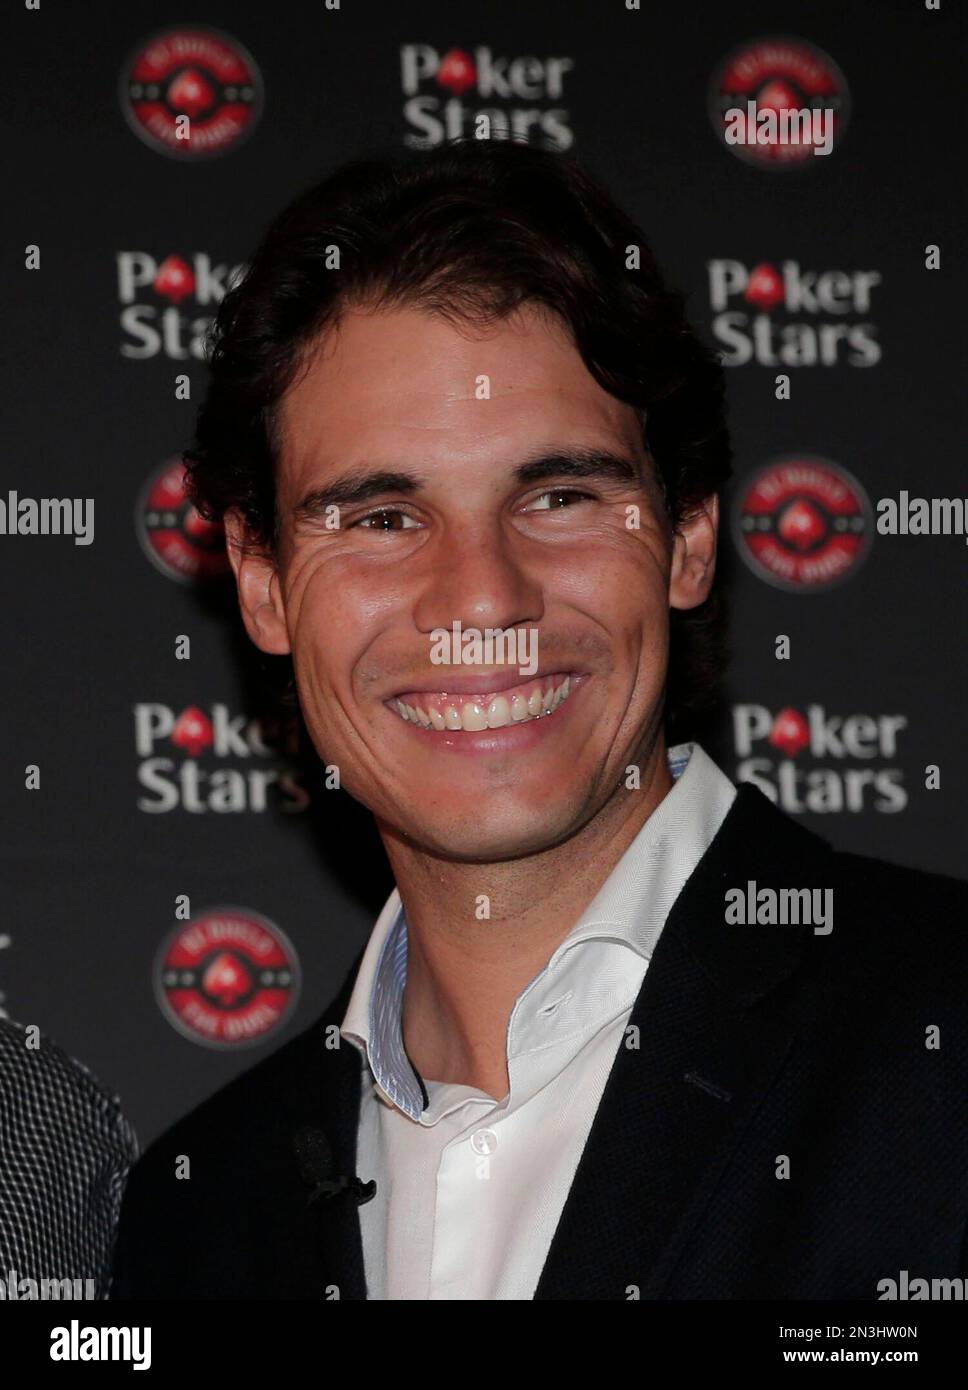 Tennis player Rafael Nadal, of Spain, poses for photographers prior to a charity poker match with Brazilian former soccer player Ronaldo at a casino in central London, Tuesday, Nov